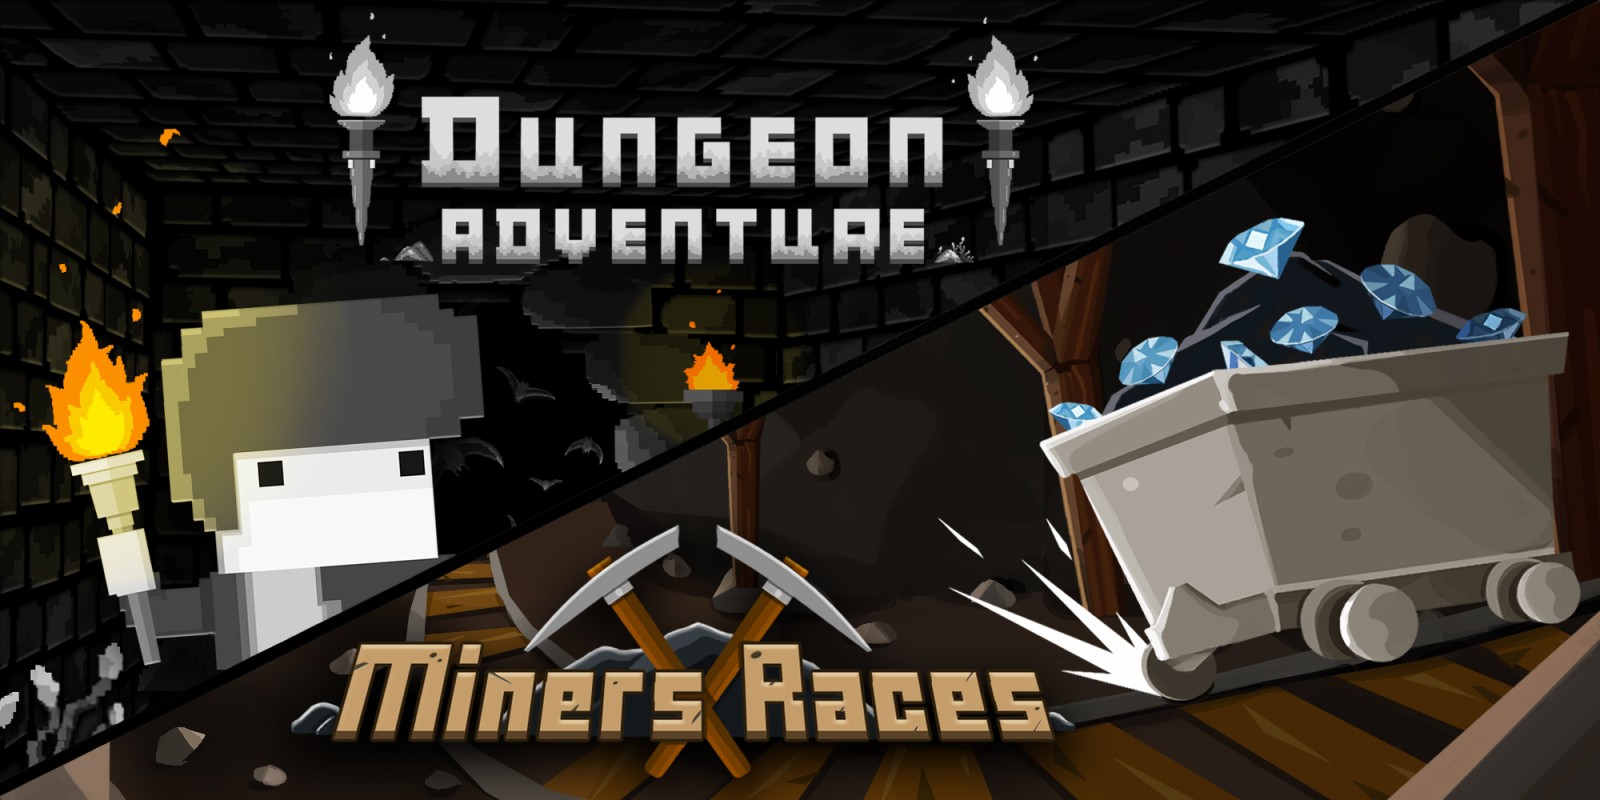 Underground Bundle: Dungeon Adventure and Miners Races